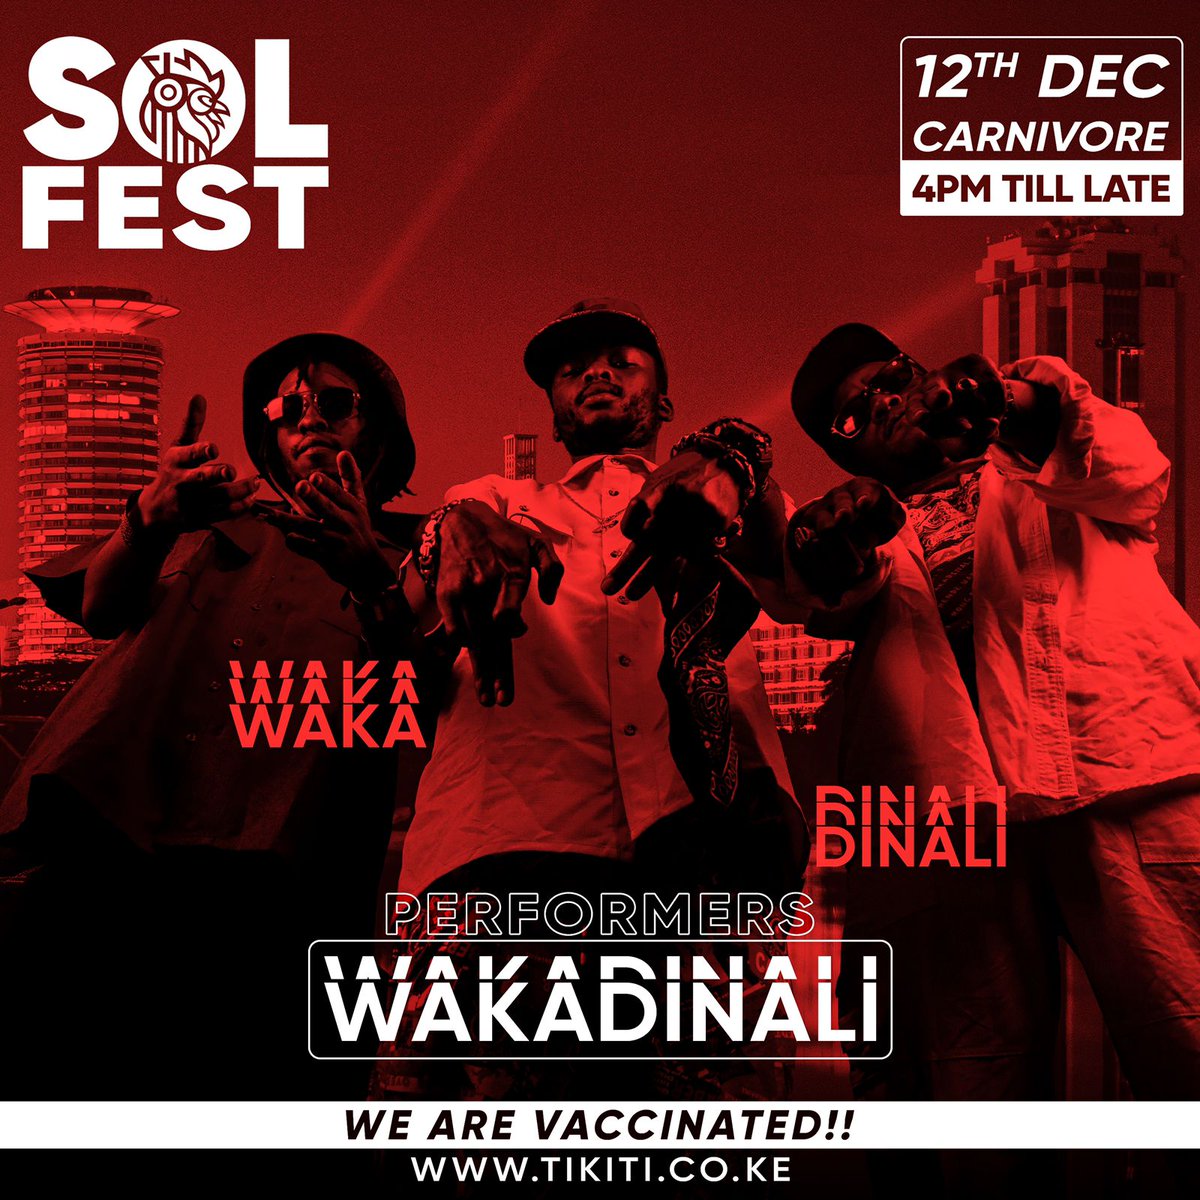 This 12th we shuttin down @carnivorekenya #SolFest. Come have fun with the finest... 
#RongExperience #ZOZANATION #WADA #Solfest #TheHealingOfANation #Exposed.